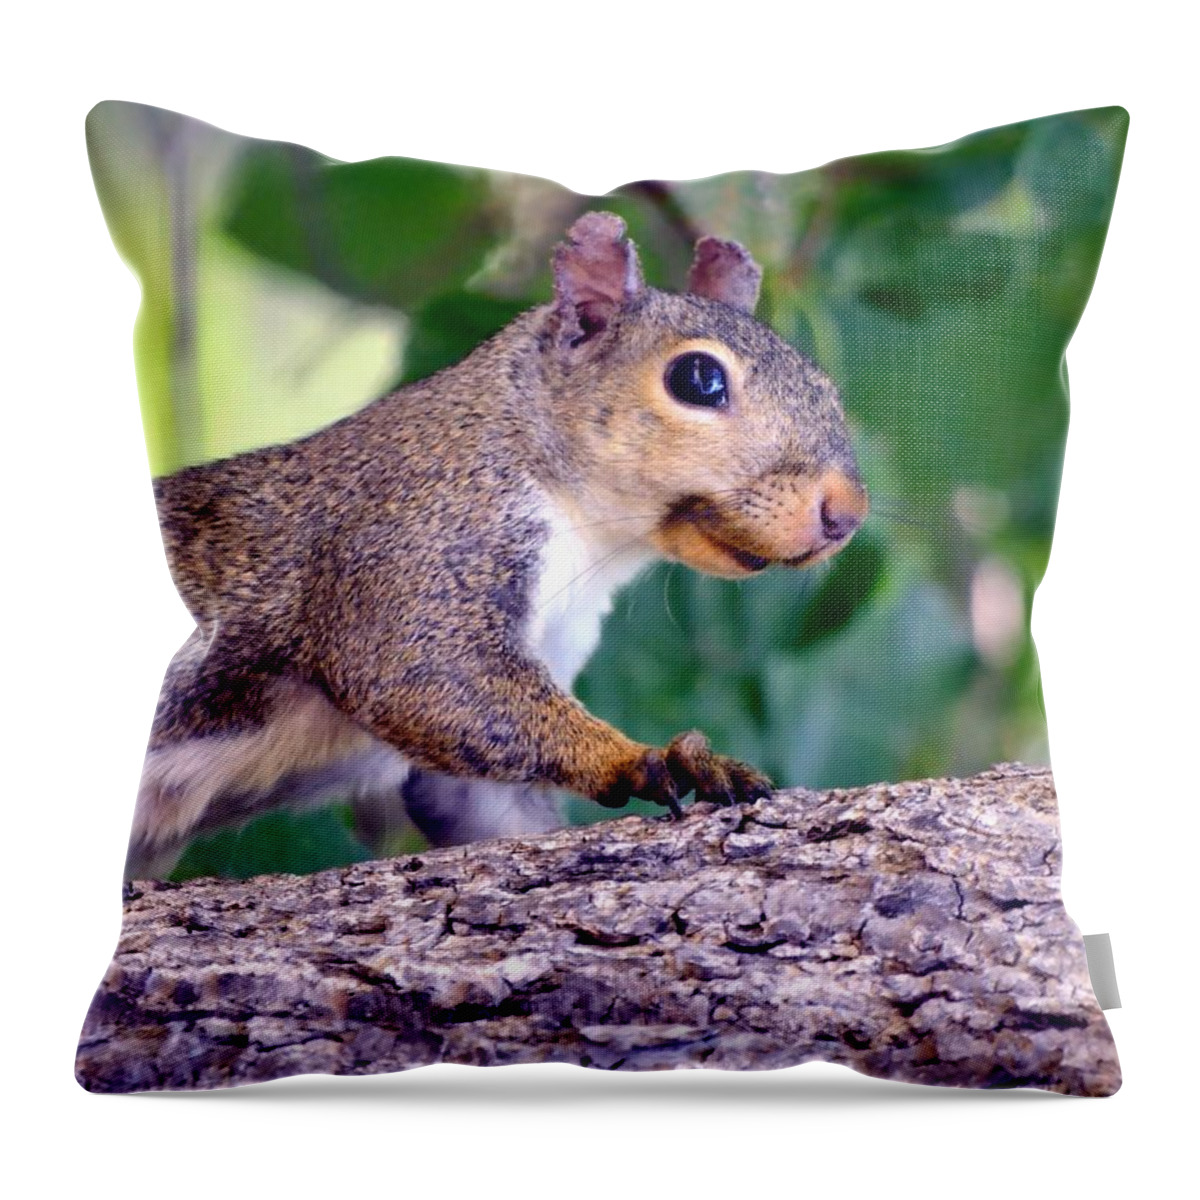 Squirrel Throw Pillow featuring the photograph Portrait Of A Squirrel by Deena Stoddard